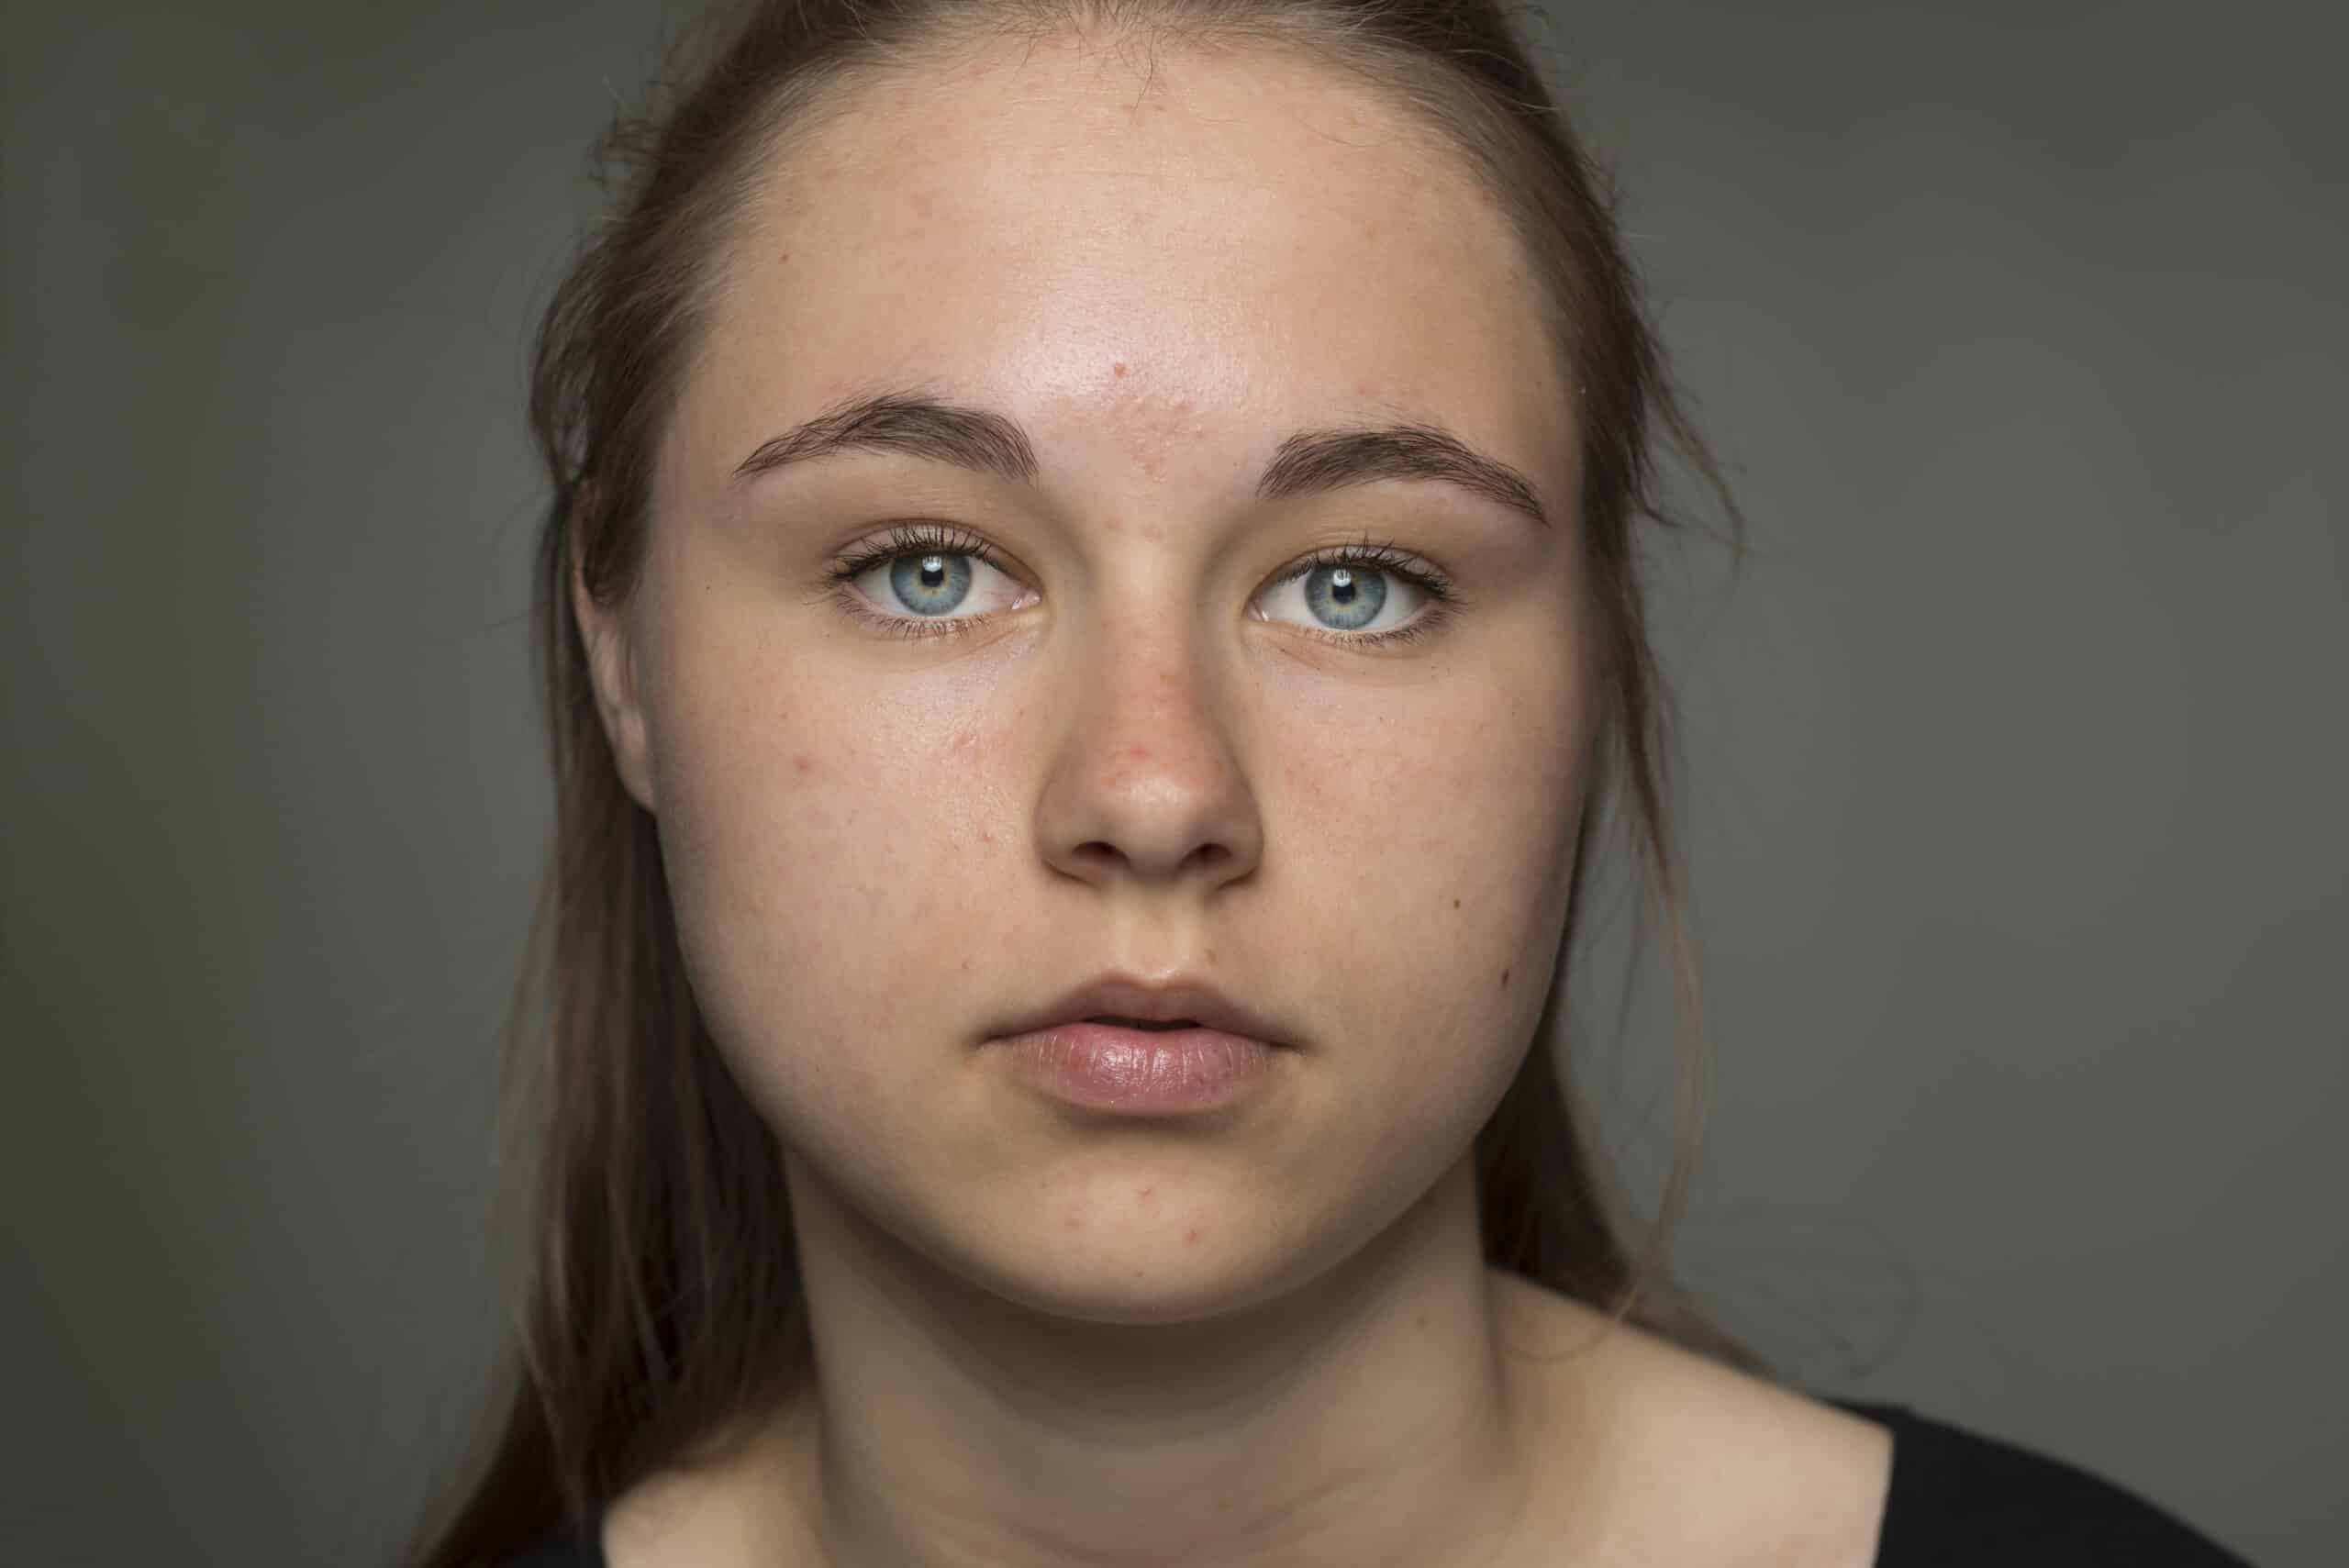 Young woman staring directly at the camera